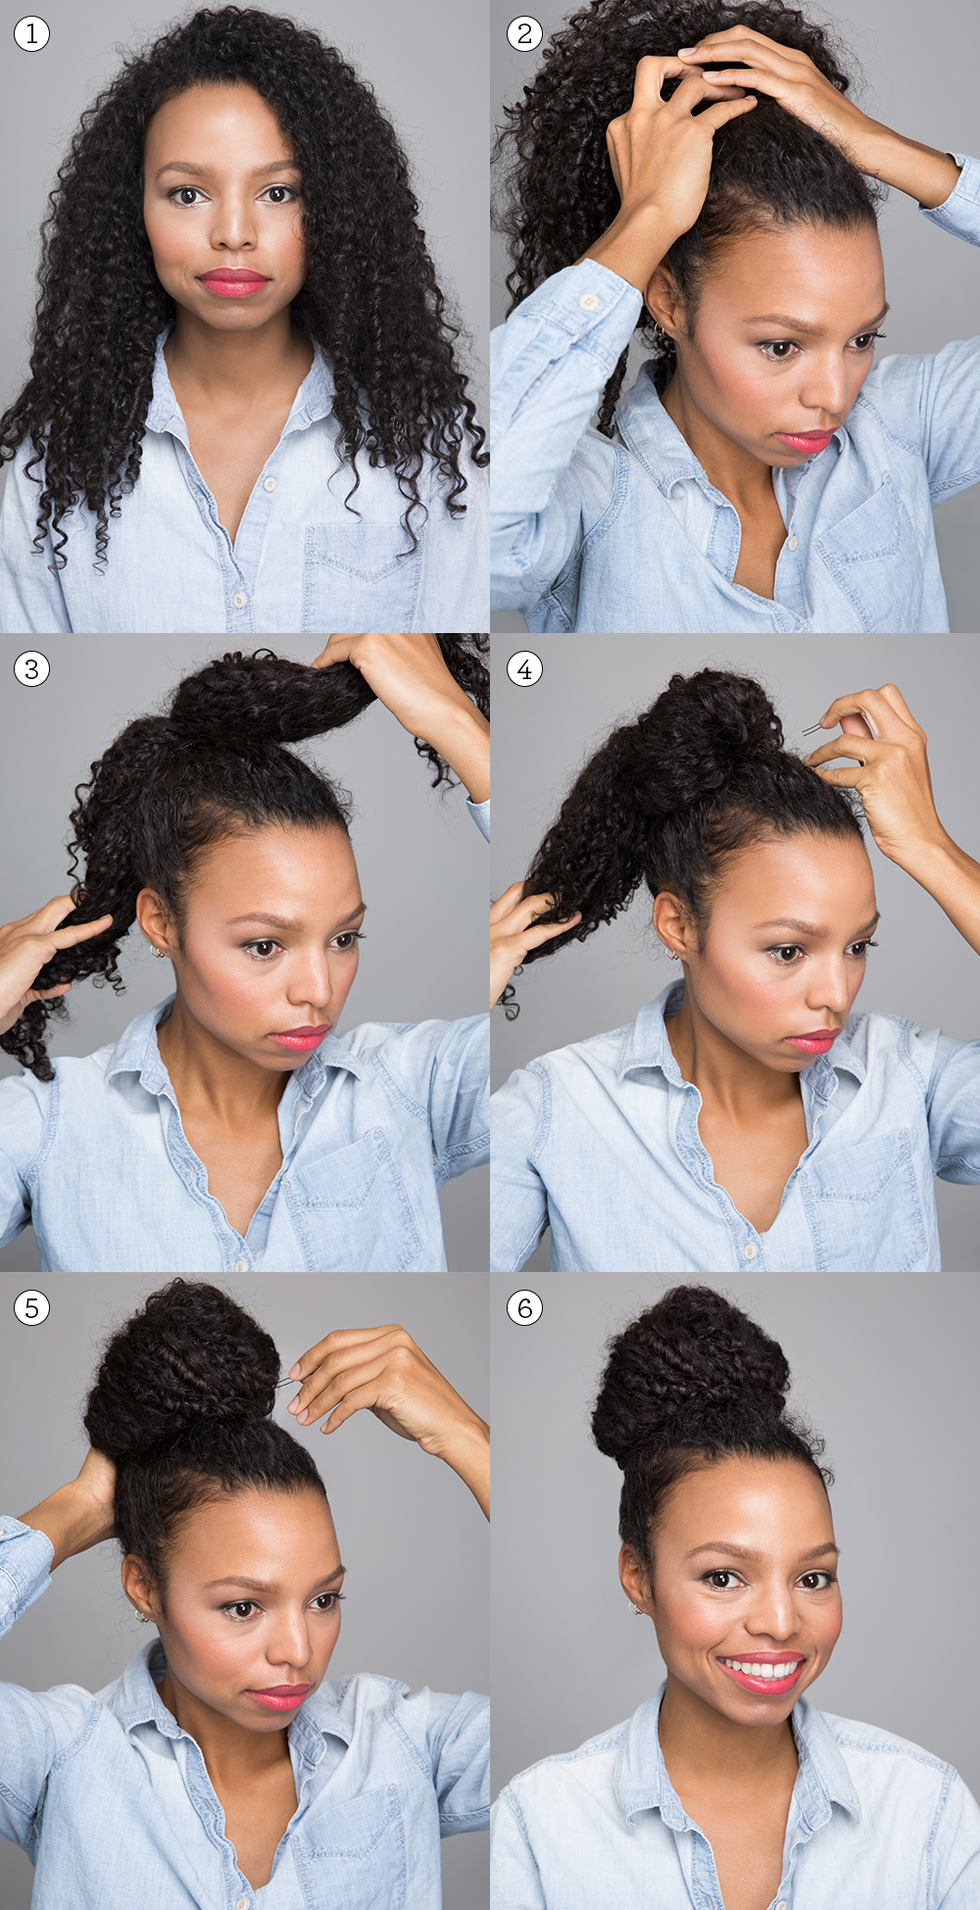 5 Curly Hairstyles For Wavy Curly Hair, Curly Hair Expert